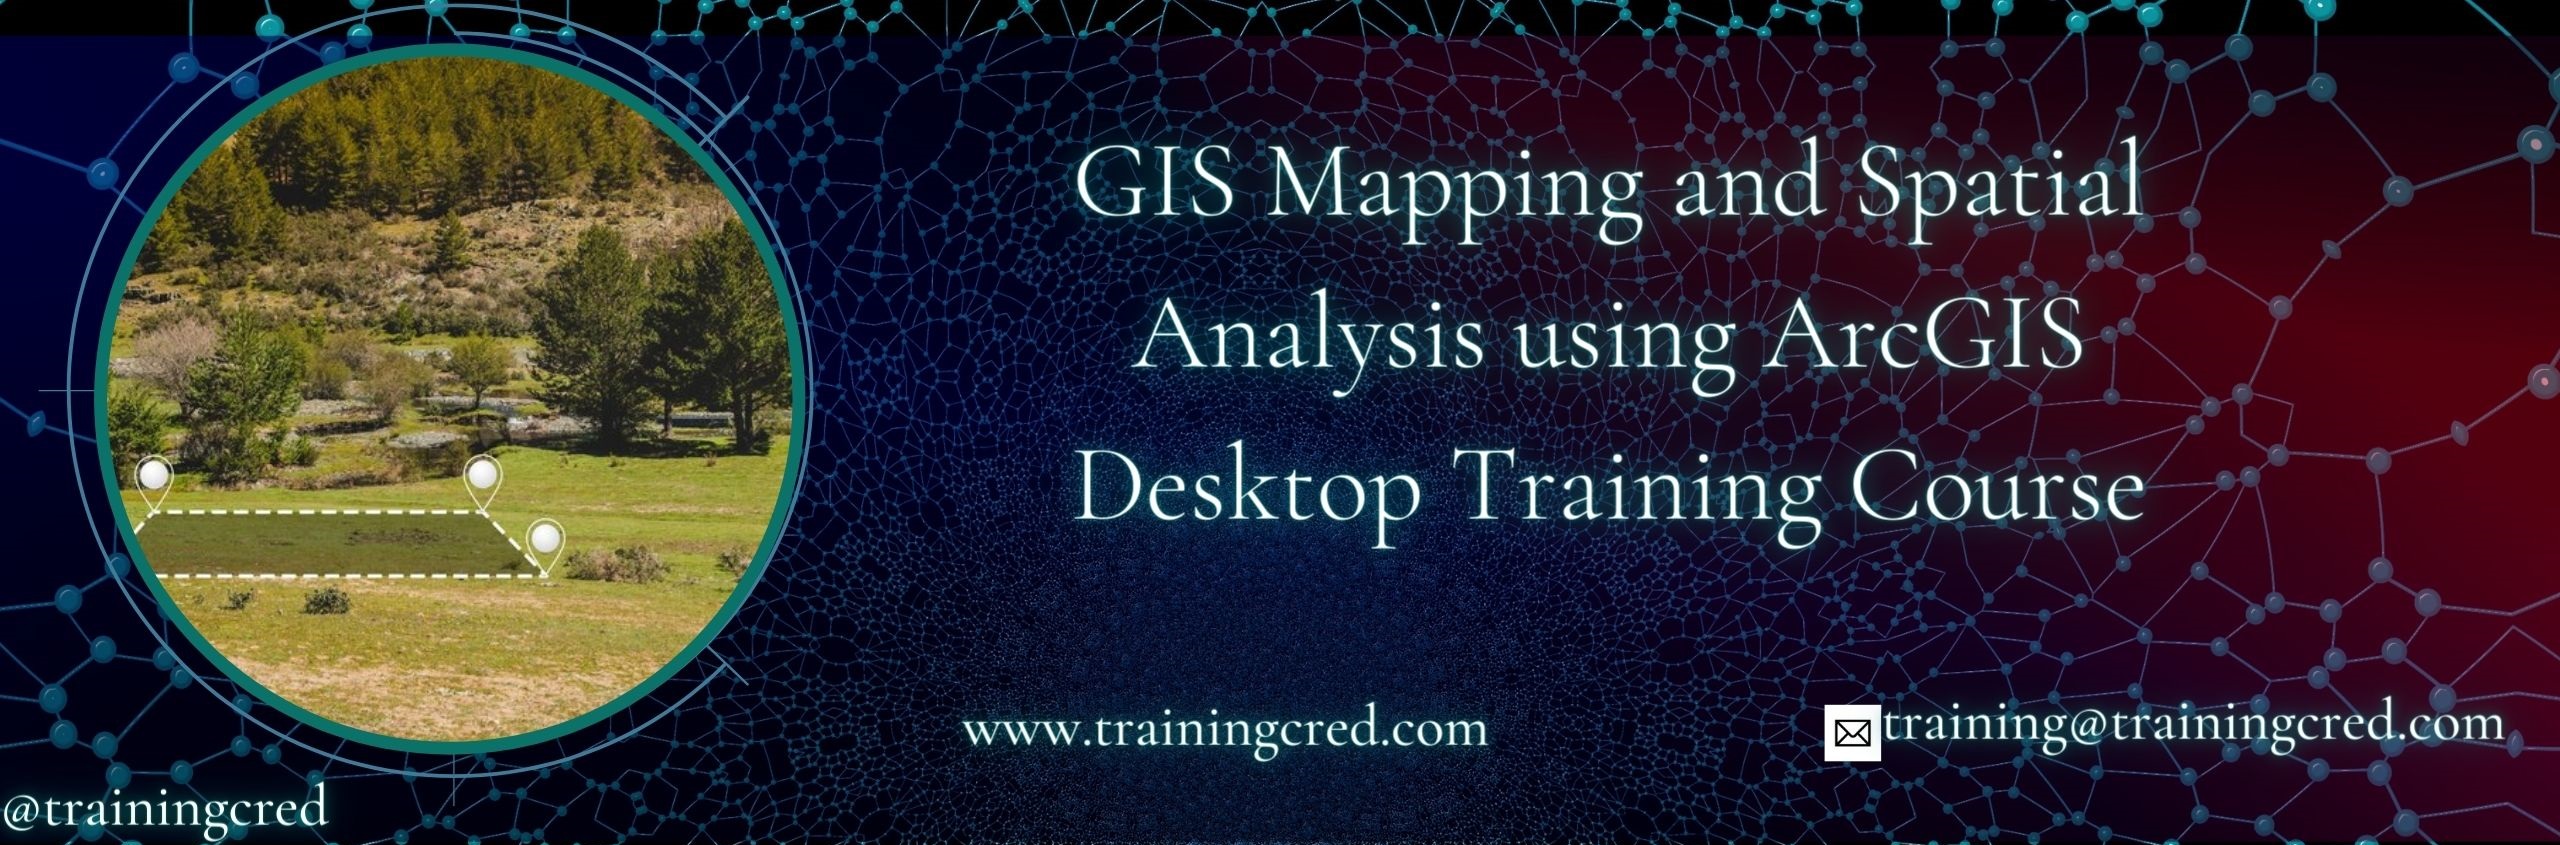 GIS Mapping and Spatial Analysis using ArcGIS Desktop Training